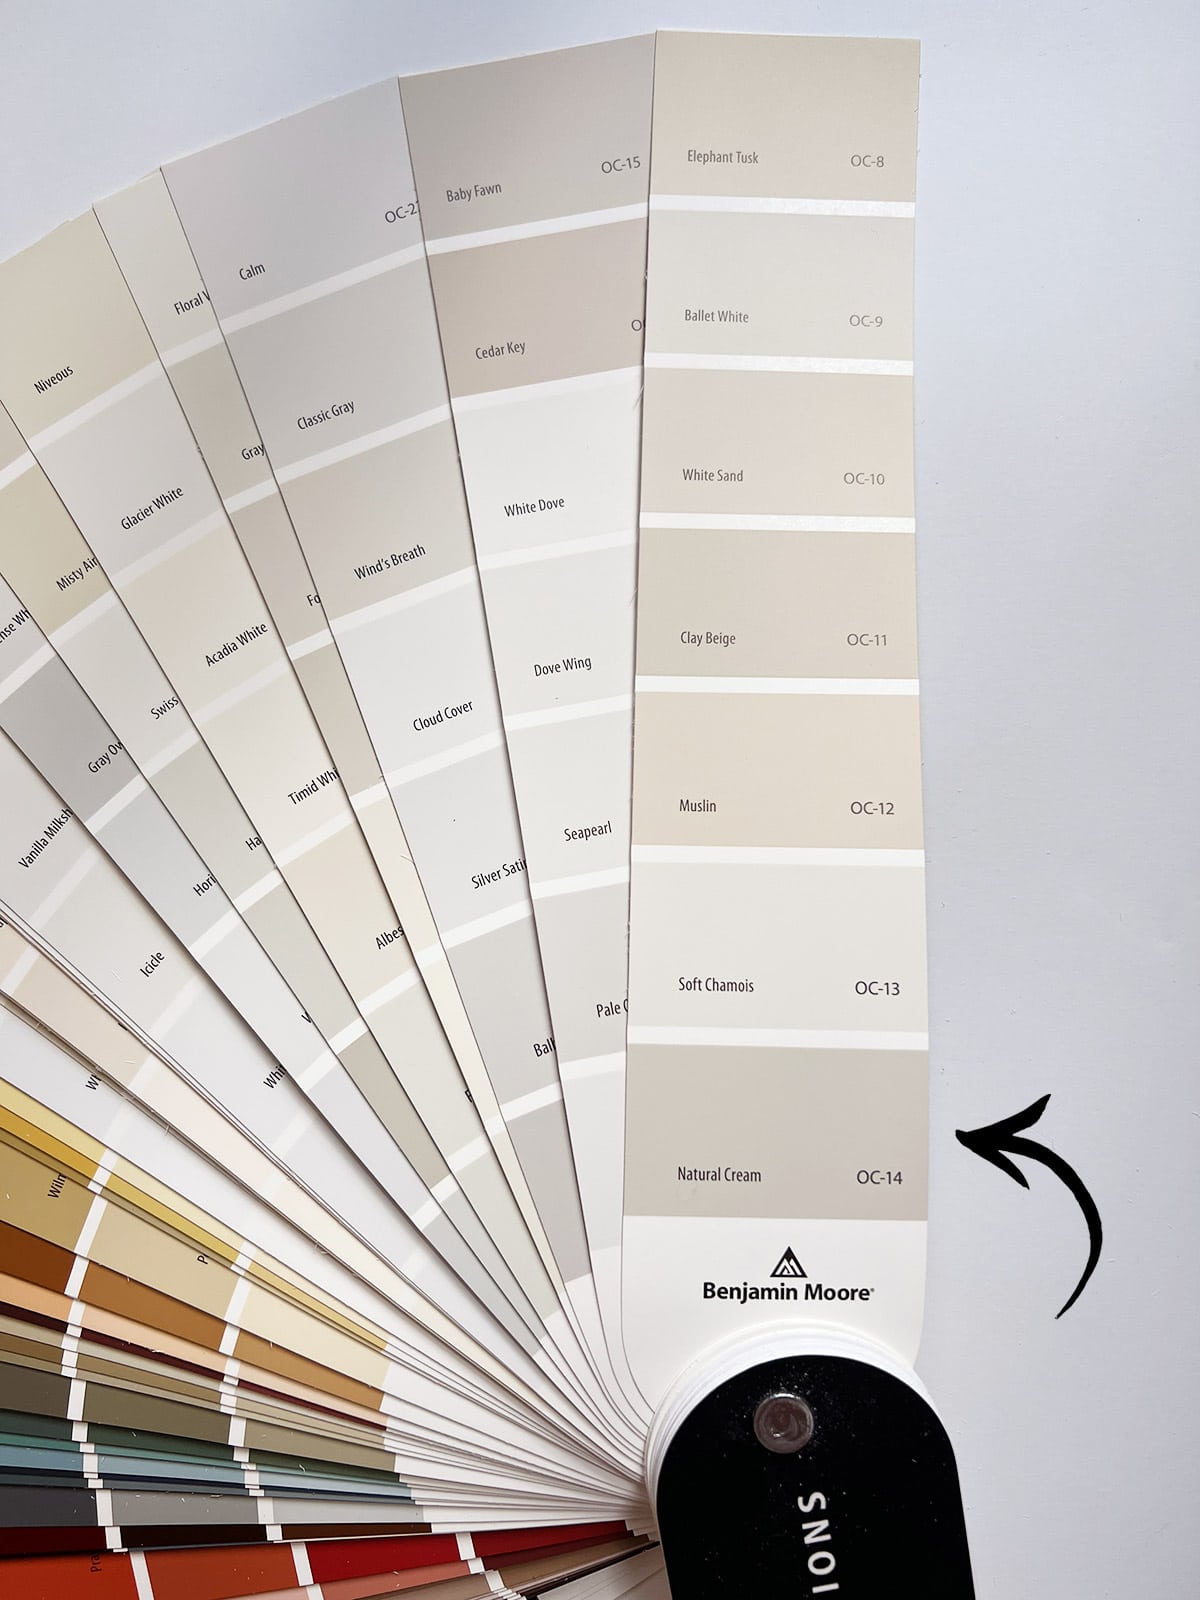 Benjamin moore natural cream swatch on a fan deck